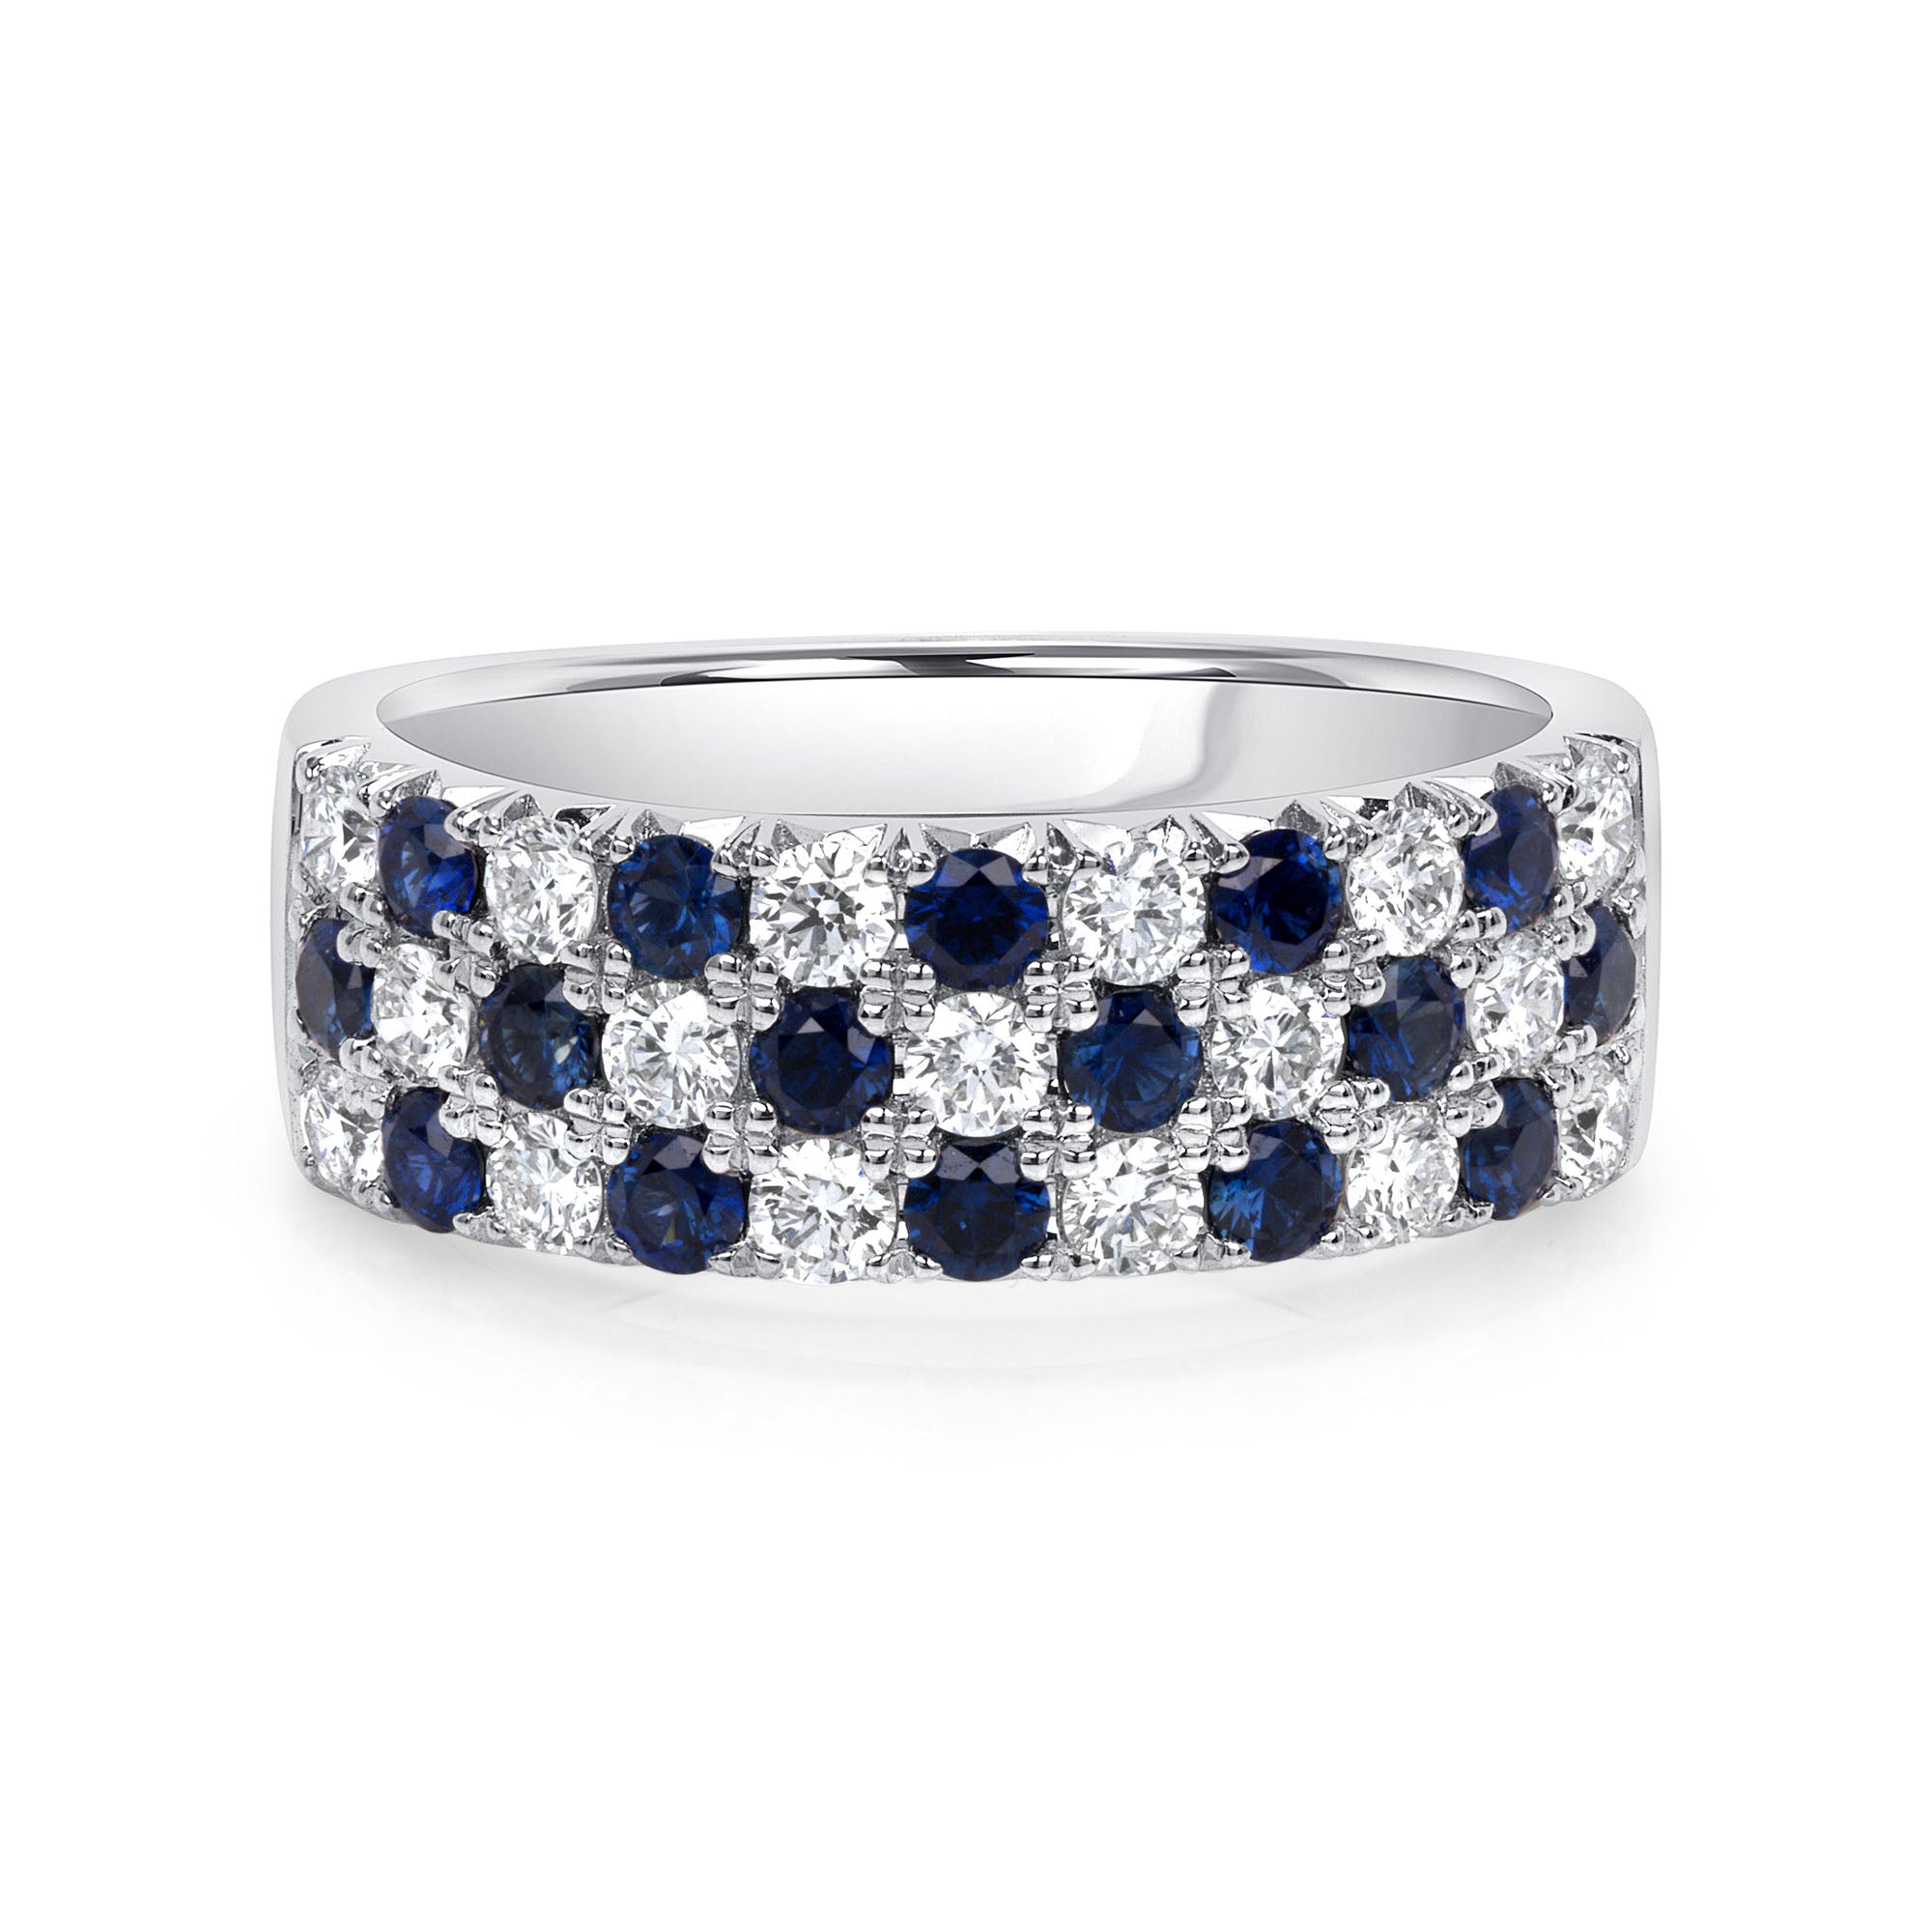 Checkered Sapphire and Diamond Ring in 18K White Gold